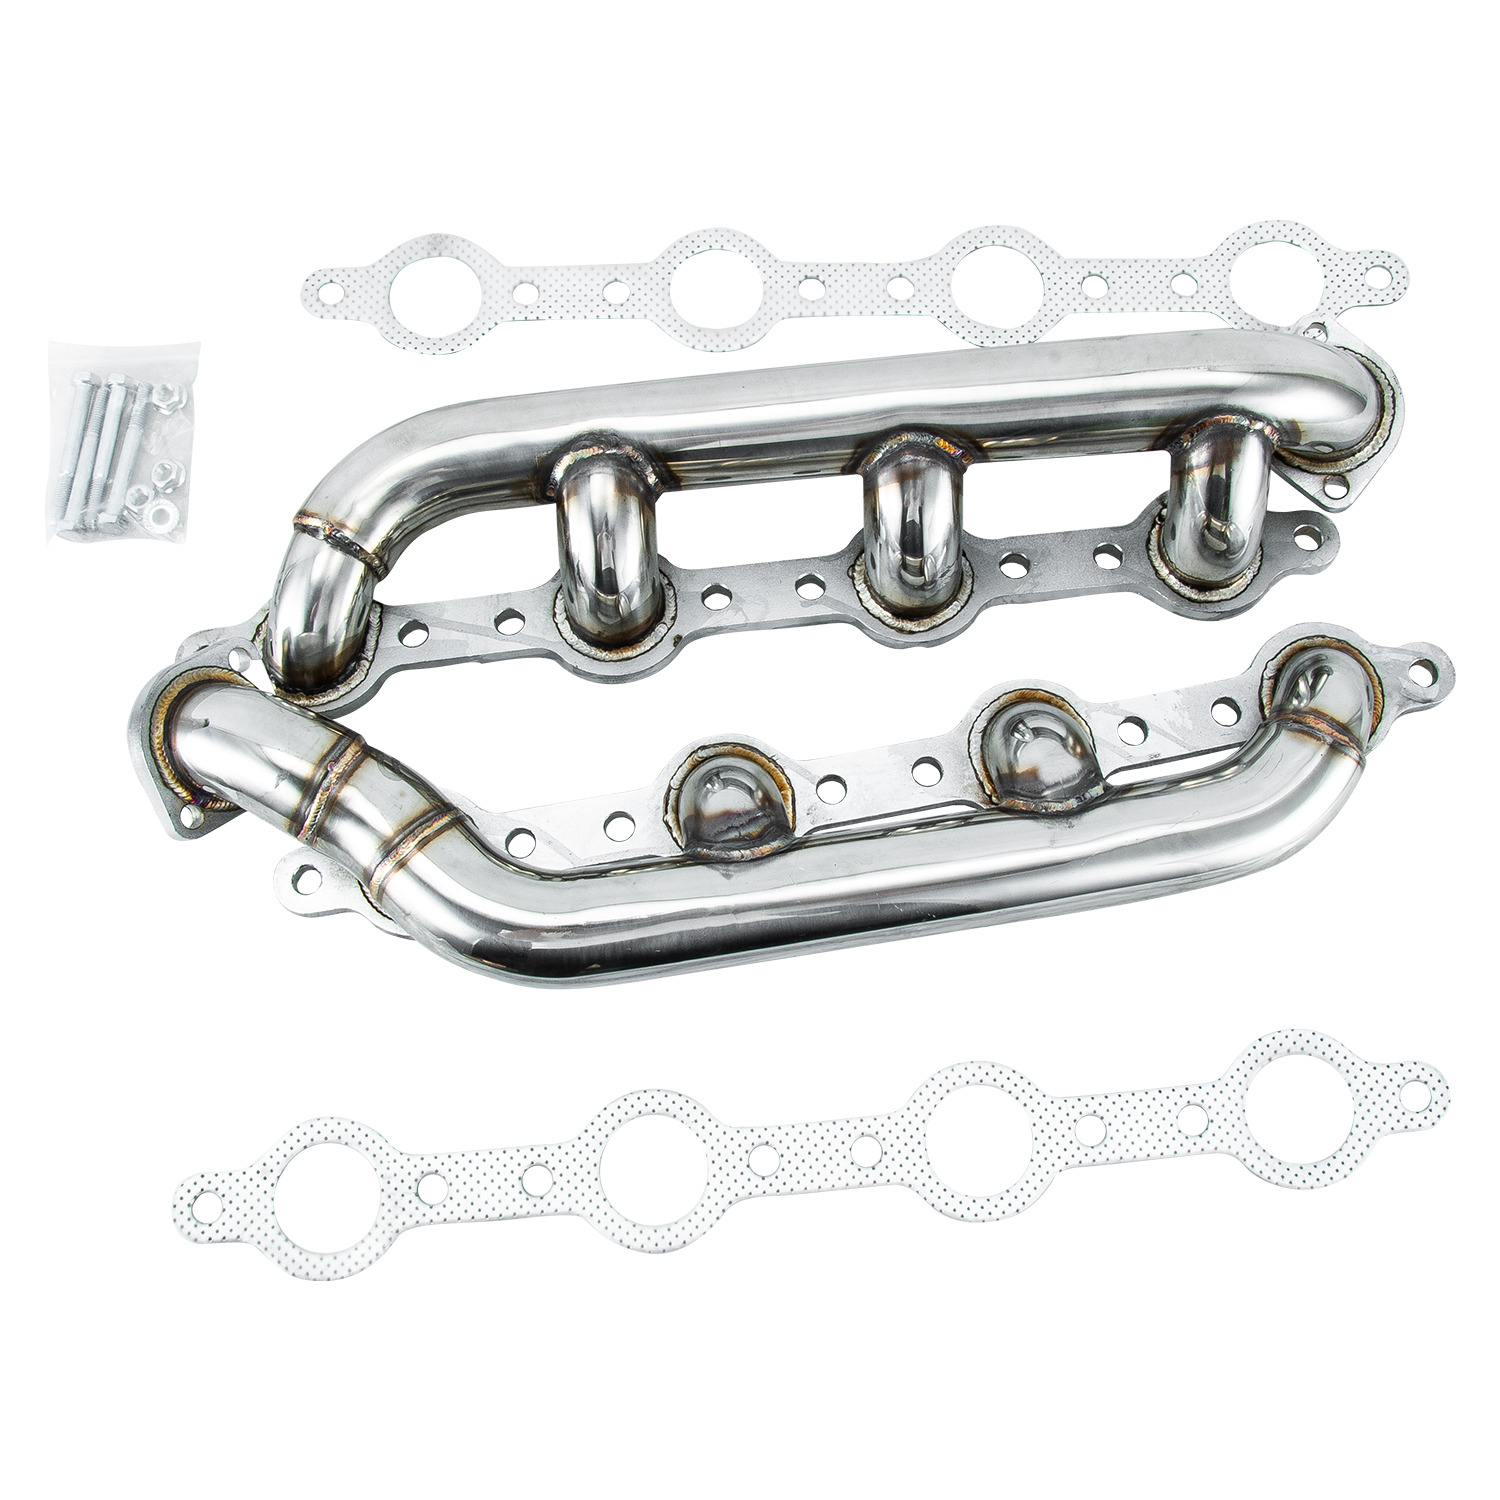 SS Headers Manifolds For 1999-2003 Ford F250 F350 F450 F550 Powerstroke 7.3L